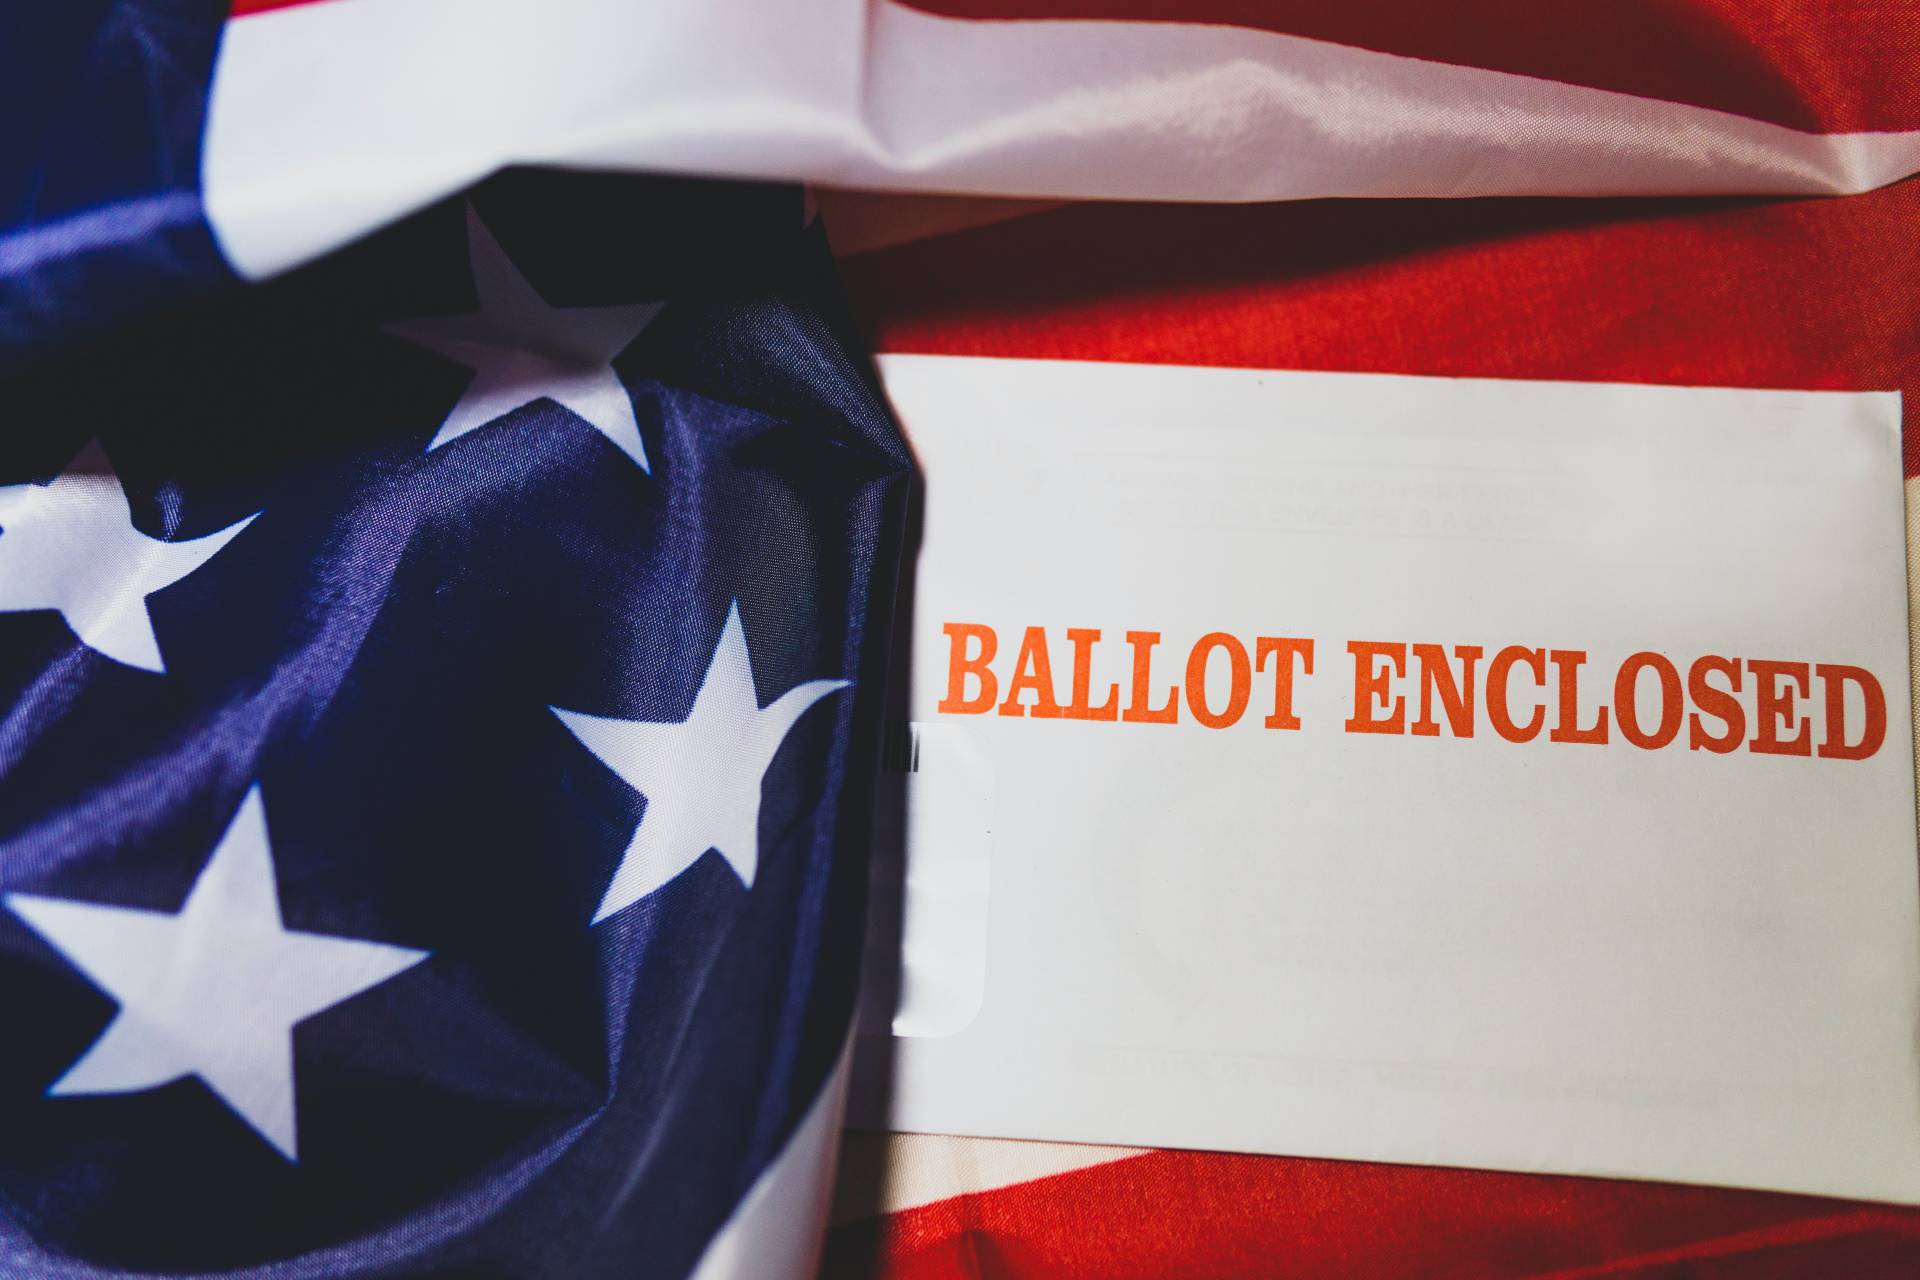 ballot enclosed sign on american flag; closest calls presidential elections